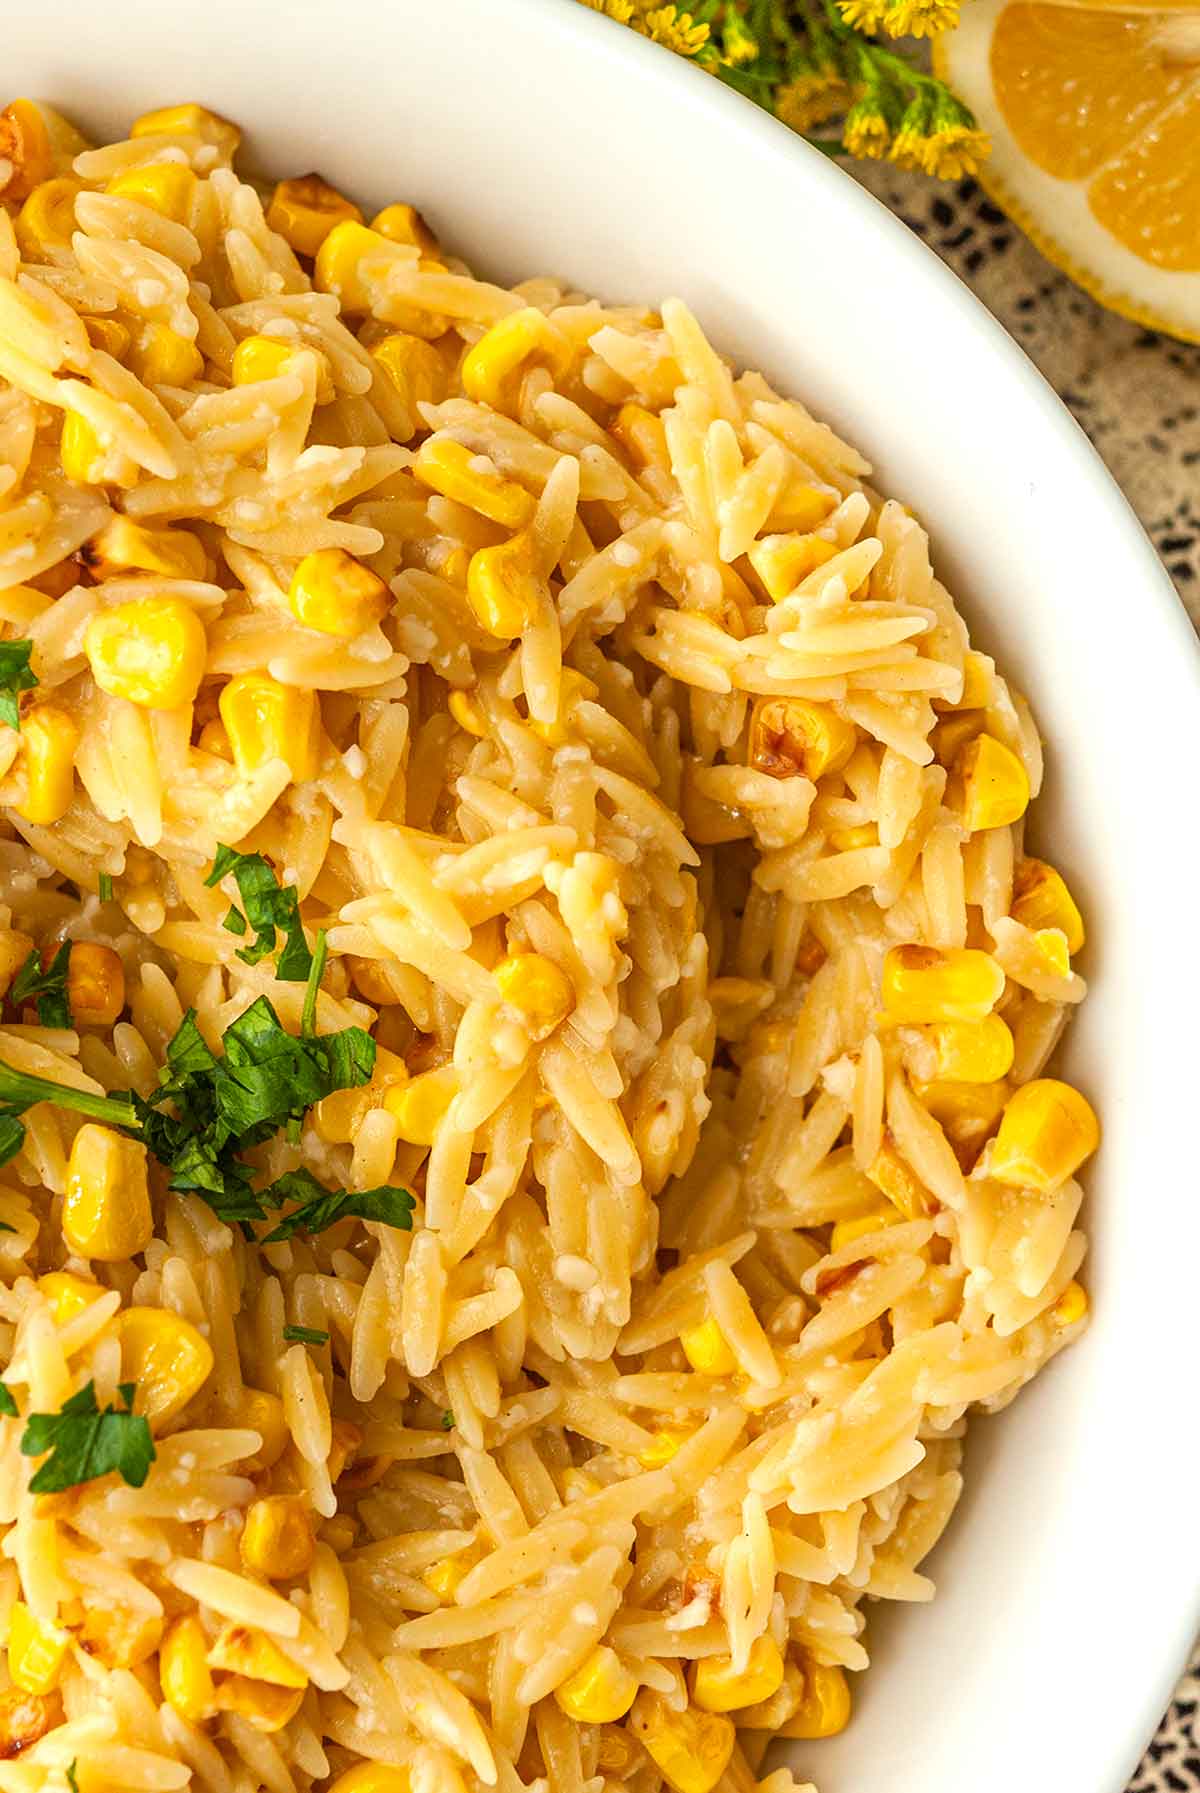 The corn and pasta in a bowl of lemon orzo.